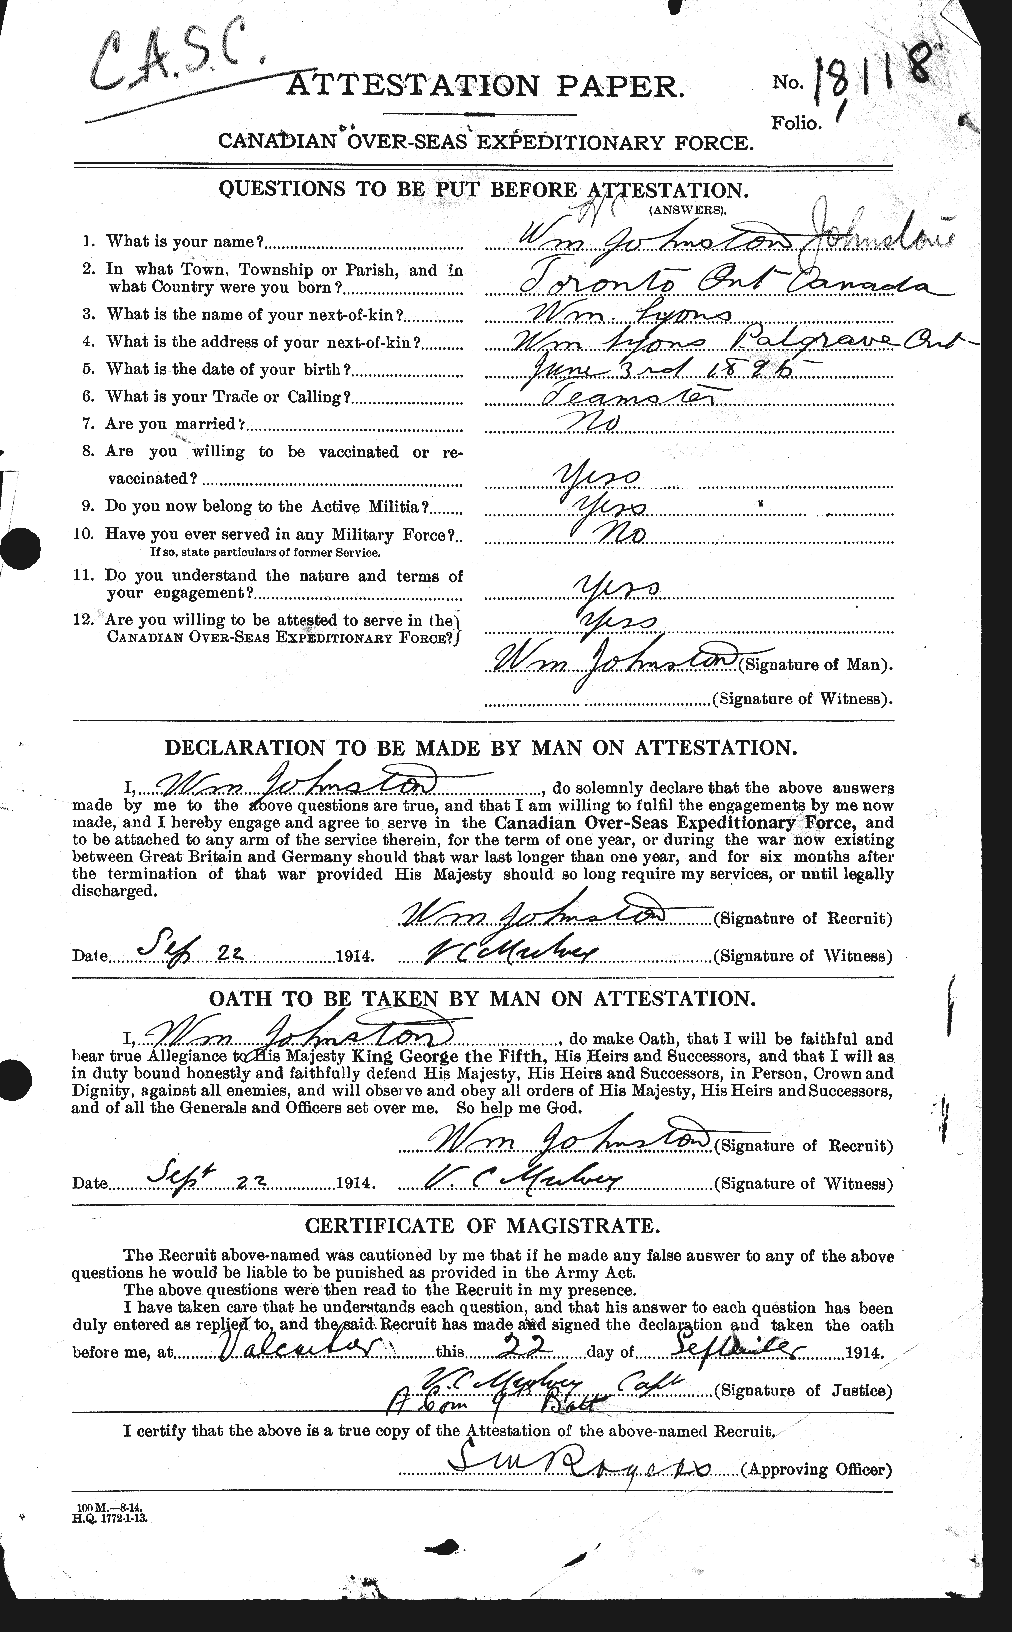 Personnel Records of the First World War - CEF 427348a